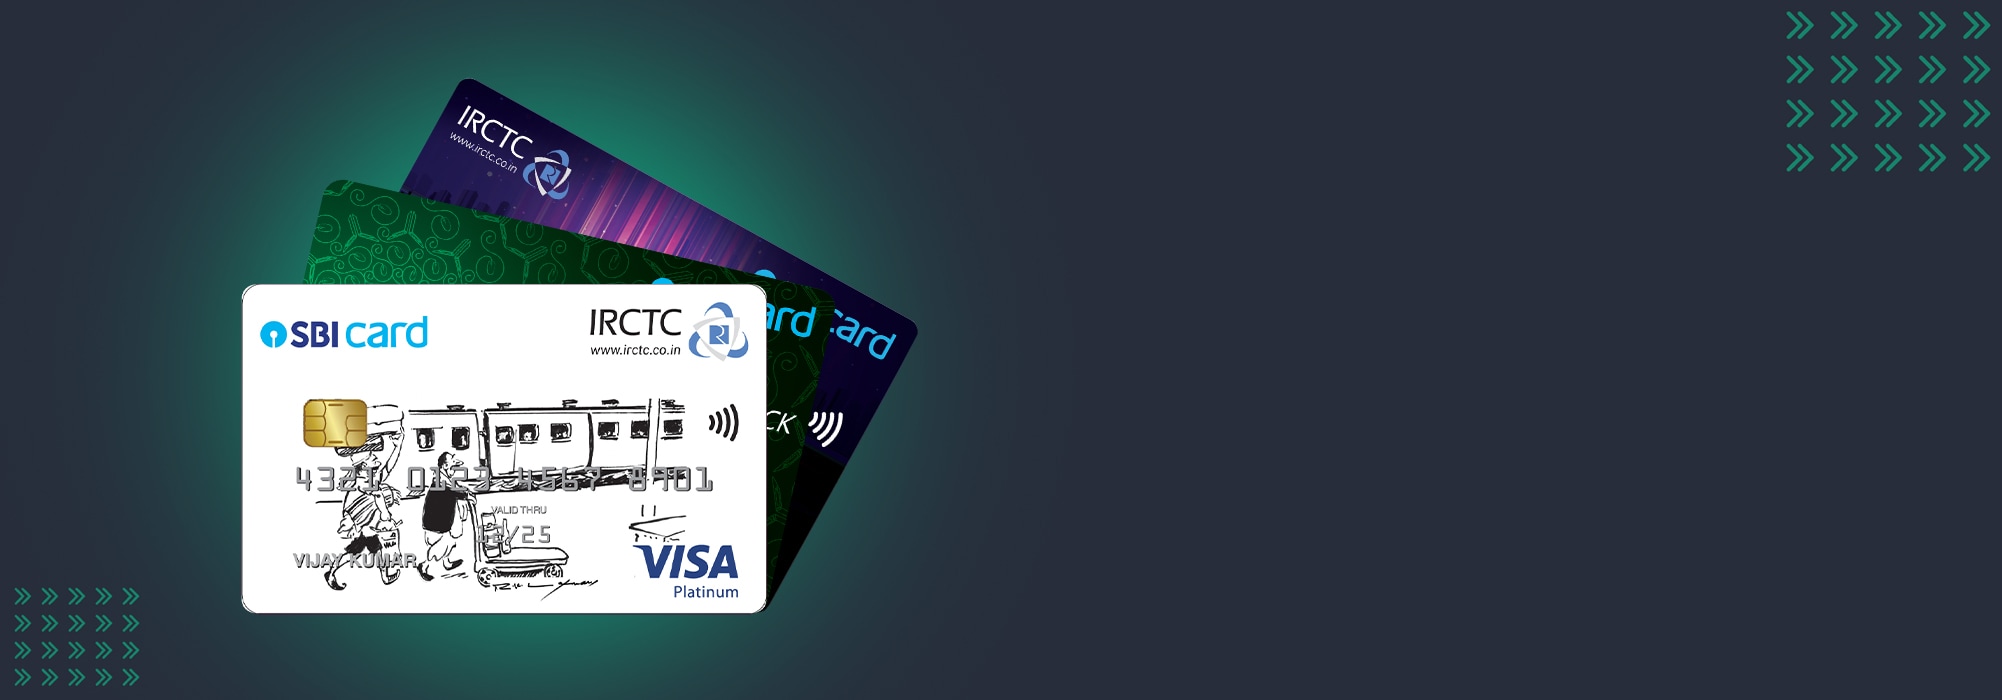 How to Unblock SBI Credit Card Online